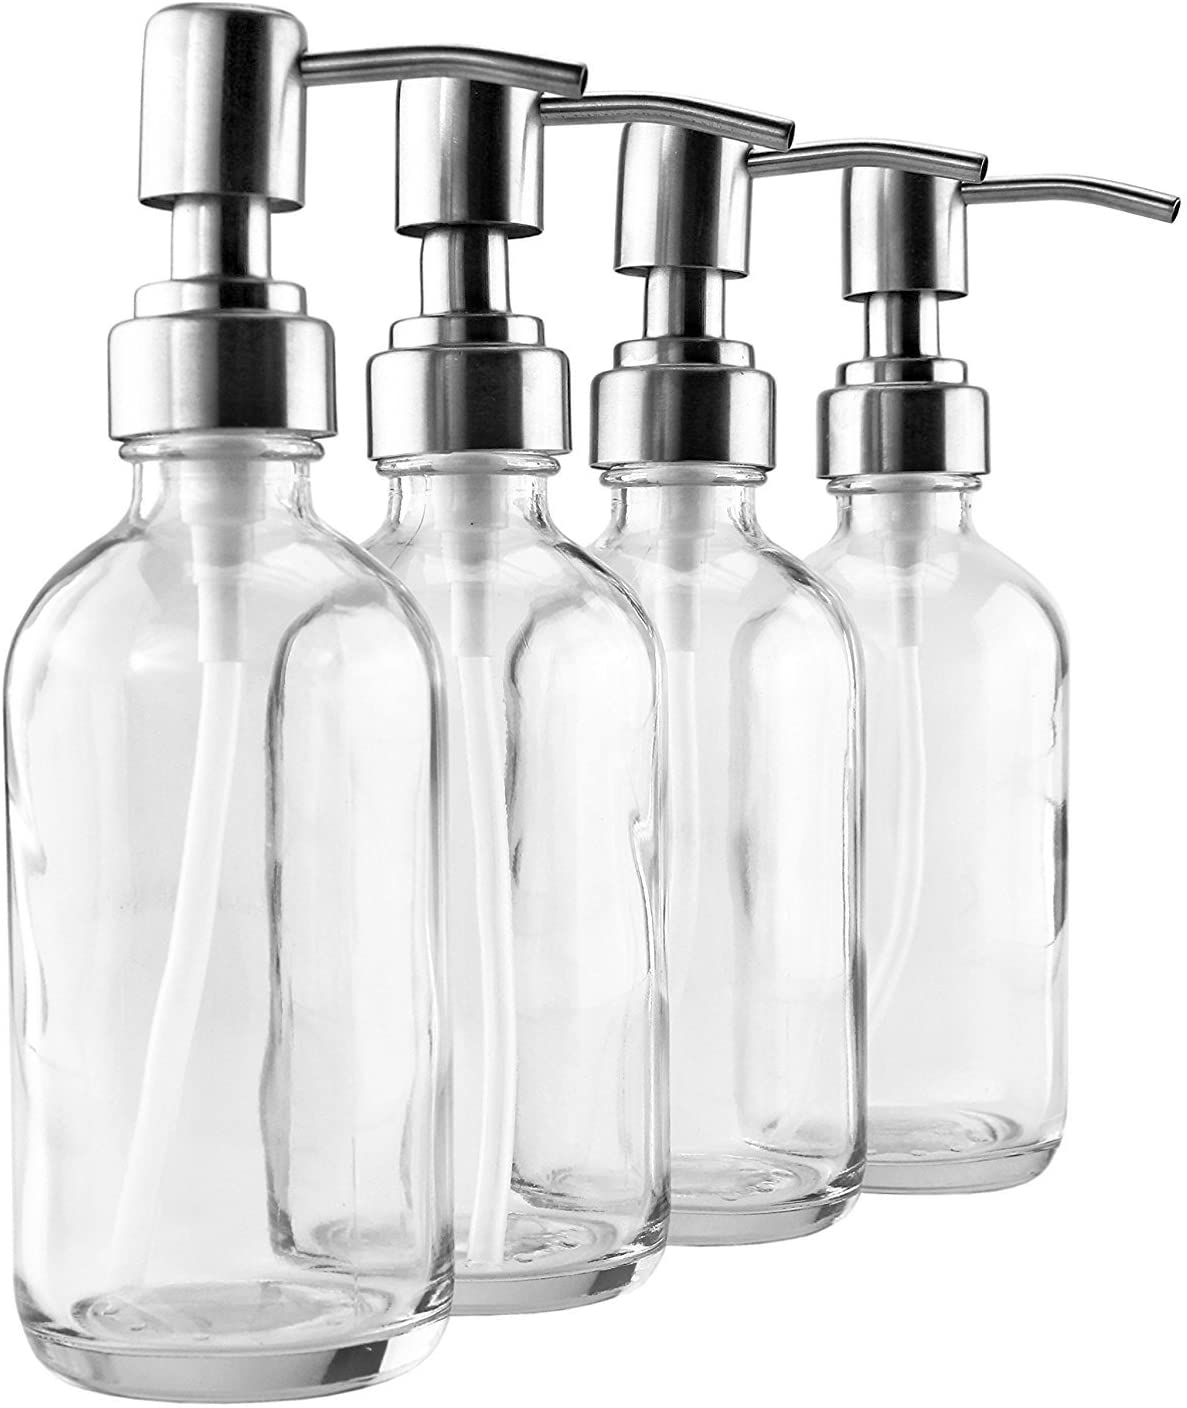 8oz Clear Glass Bottles w/ Stainless Steel Pumps (24-Pack) - SH_899_BUNDLE